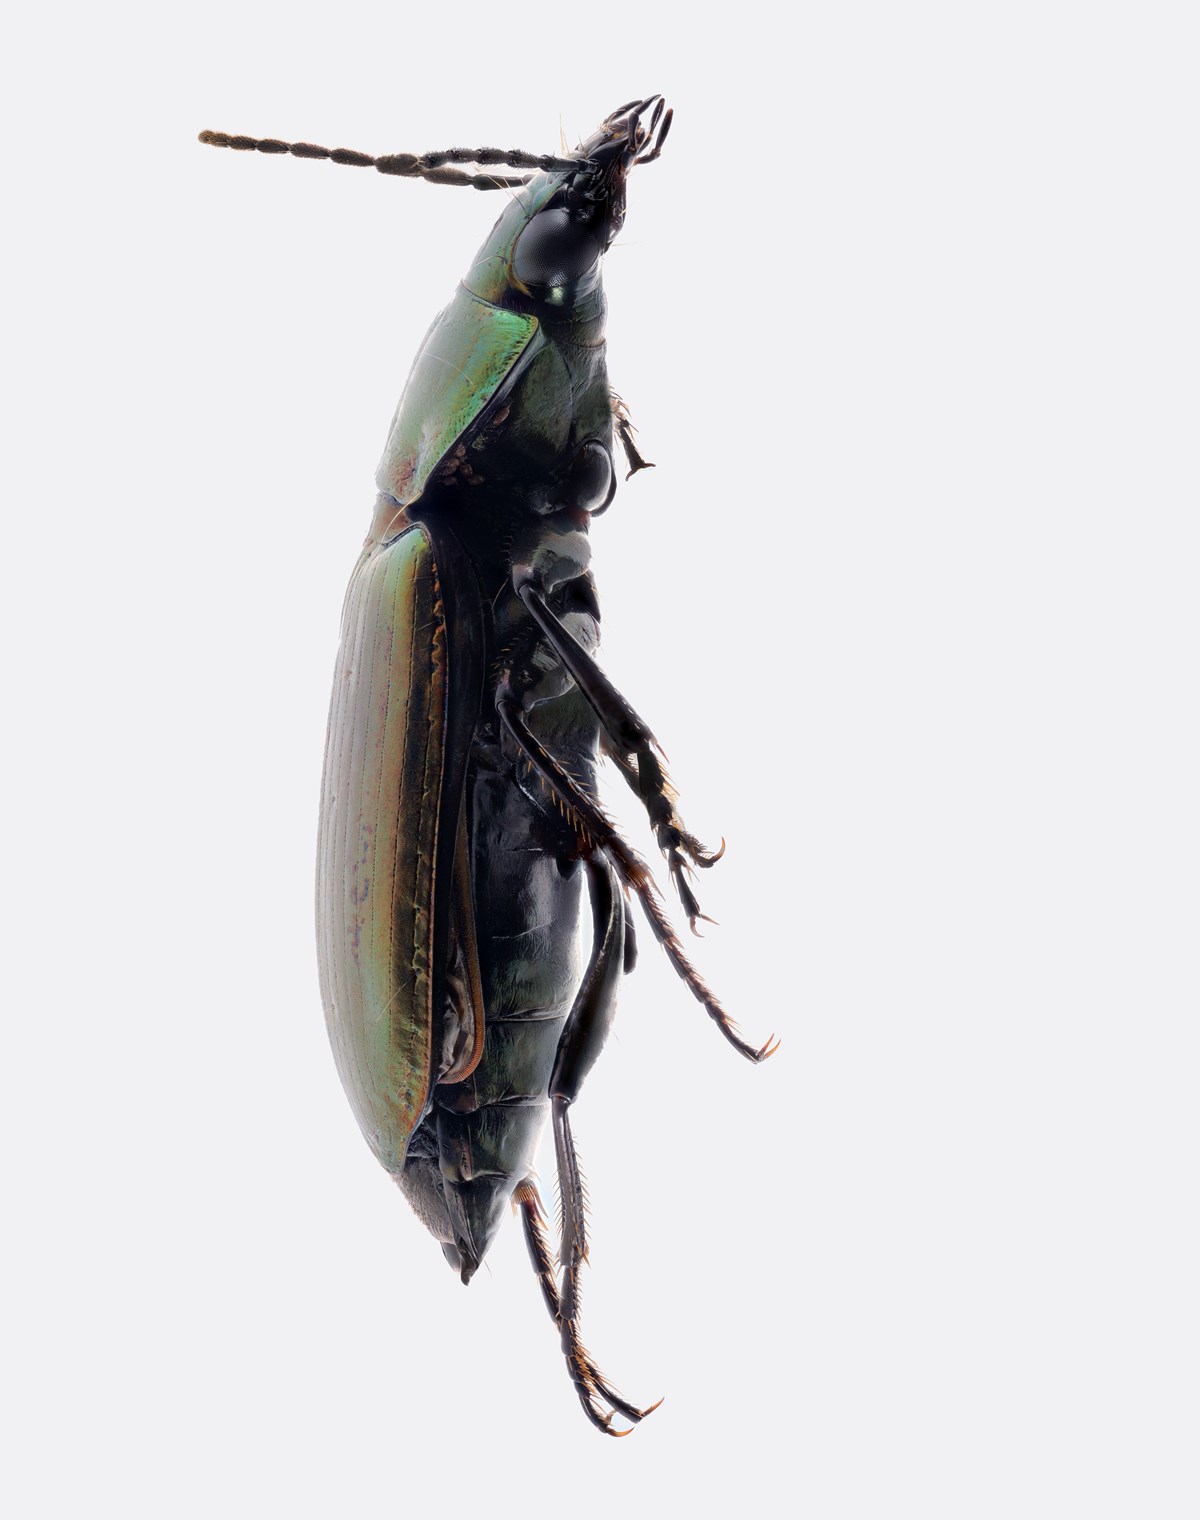 macrophoto of a carabid beetle collected in Yellowstone